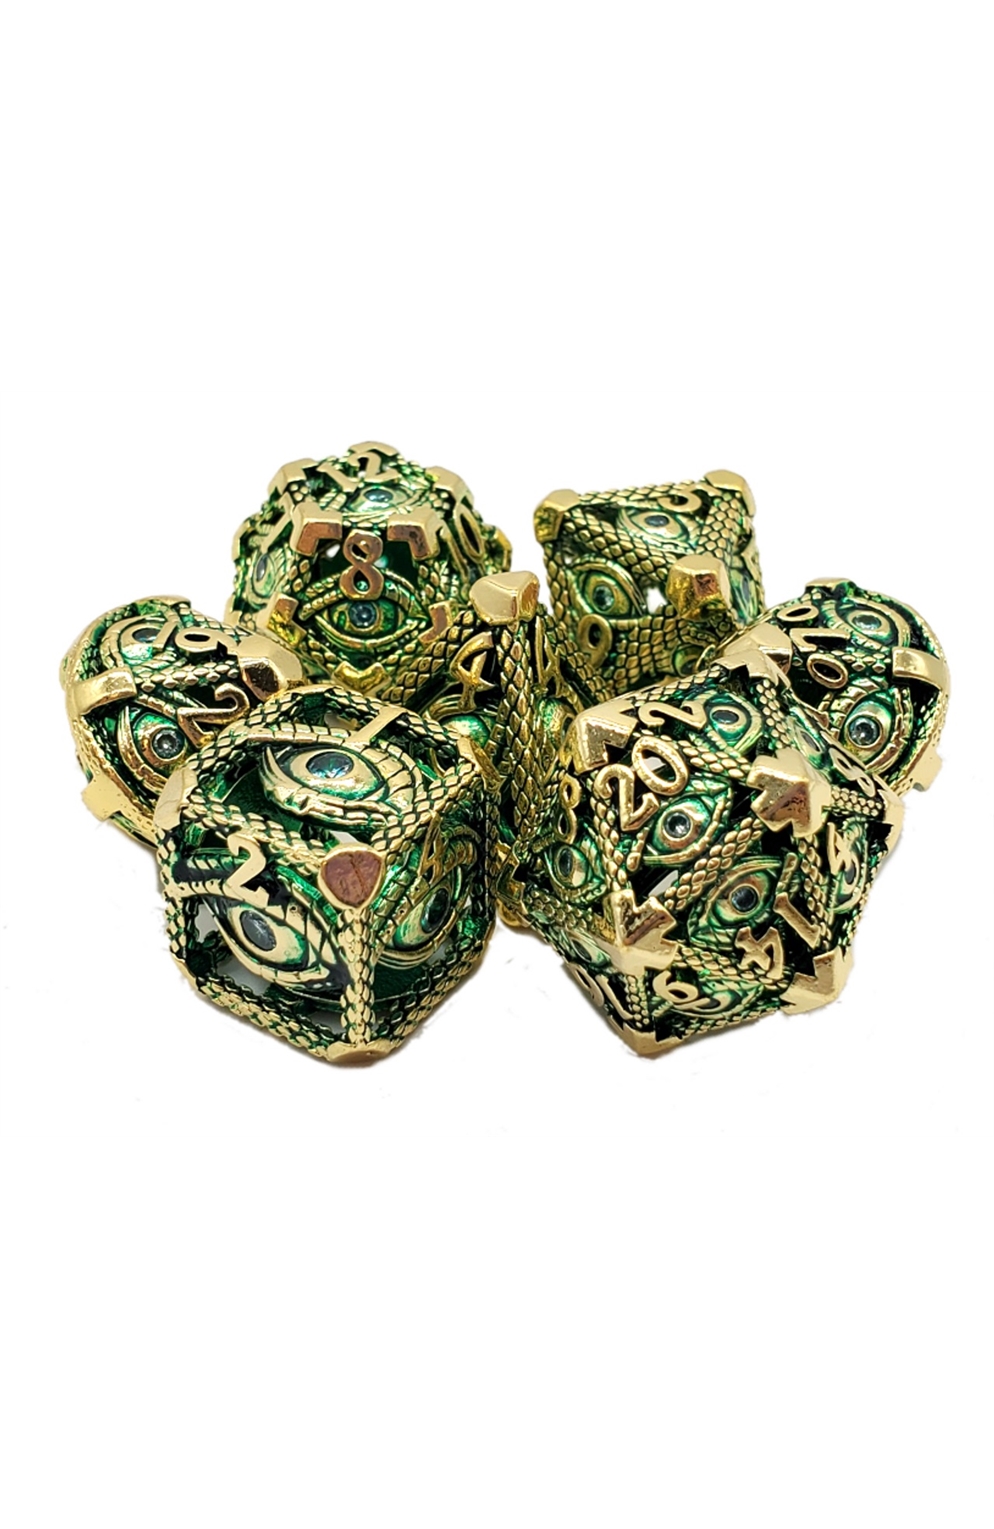 Old School 7 Piece Dnd Rpg Metal Dice Set: Hollow All Seeing Eye Dice - Gold W/ Green